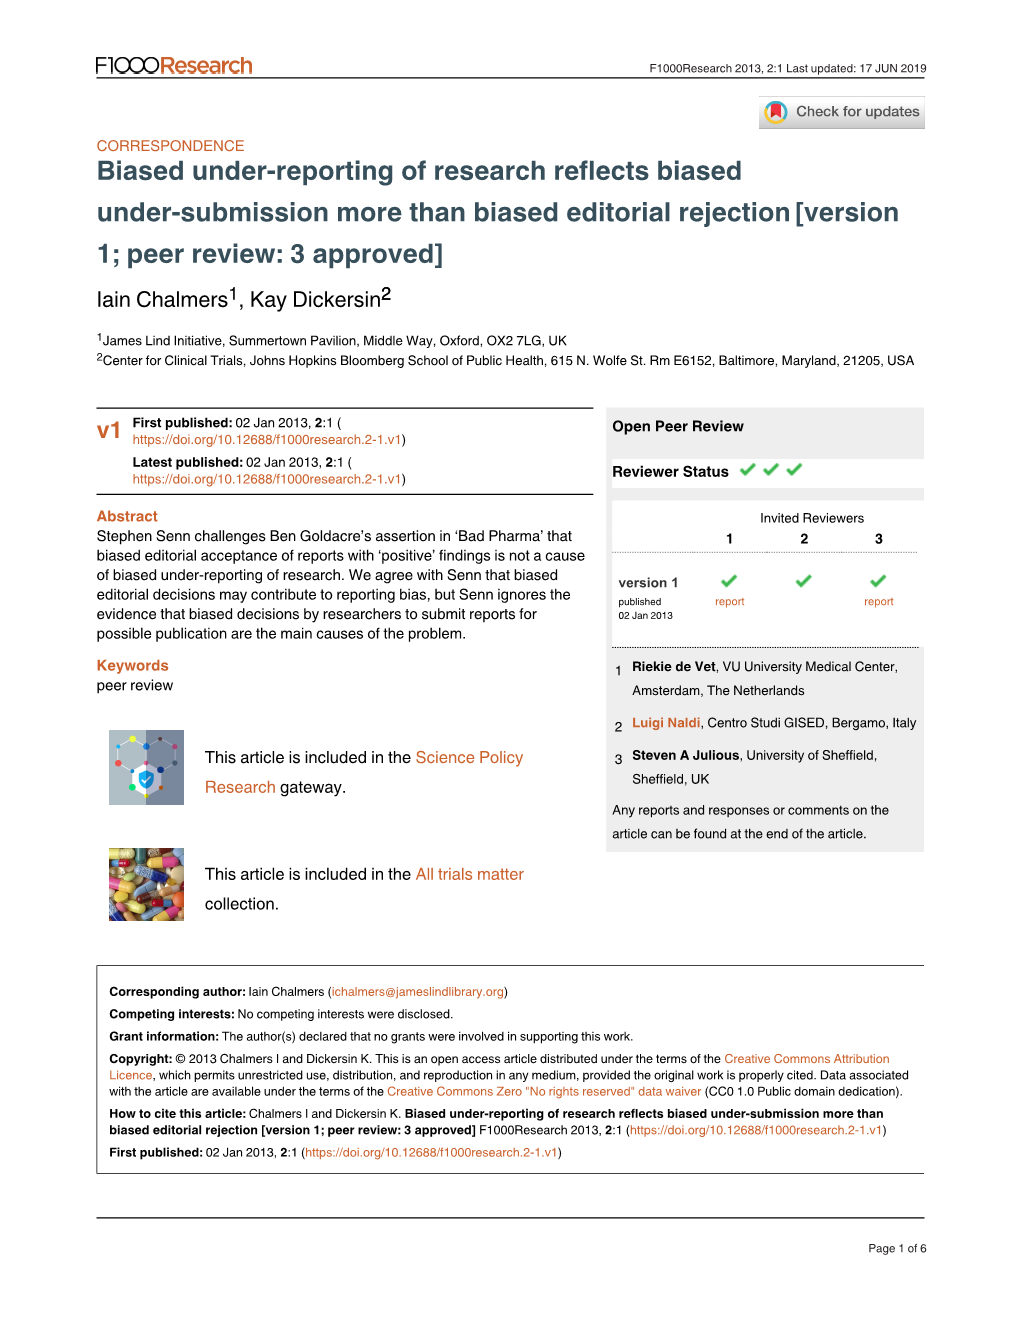 Biased Under-Reporting of Research Reflects